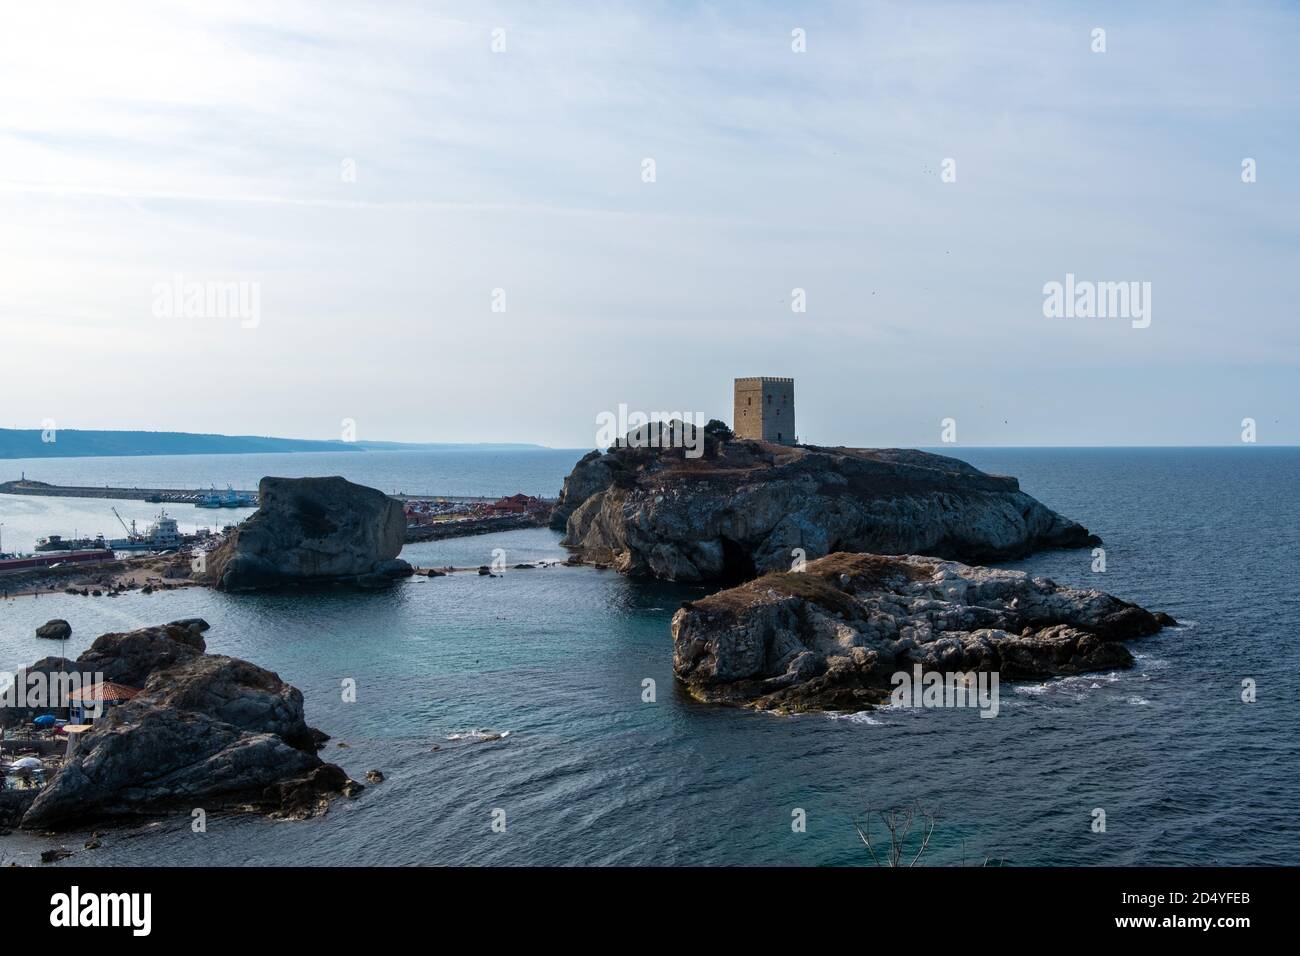 Panoramic view of Black sea and Shile castle. Şile kalesi. The photos of the Castle, Lighthouse and fishing port located in Şile. Stock Photo